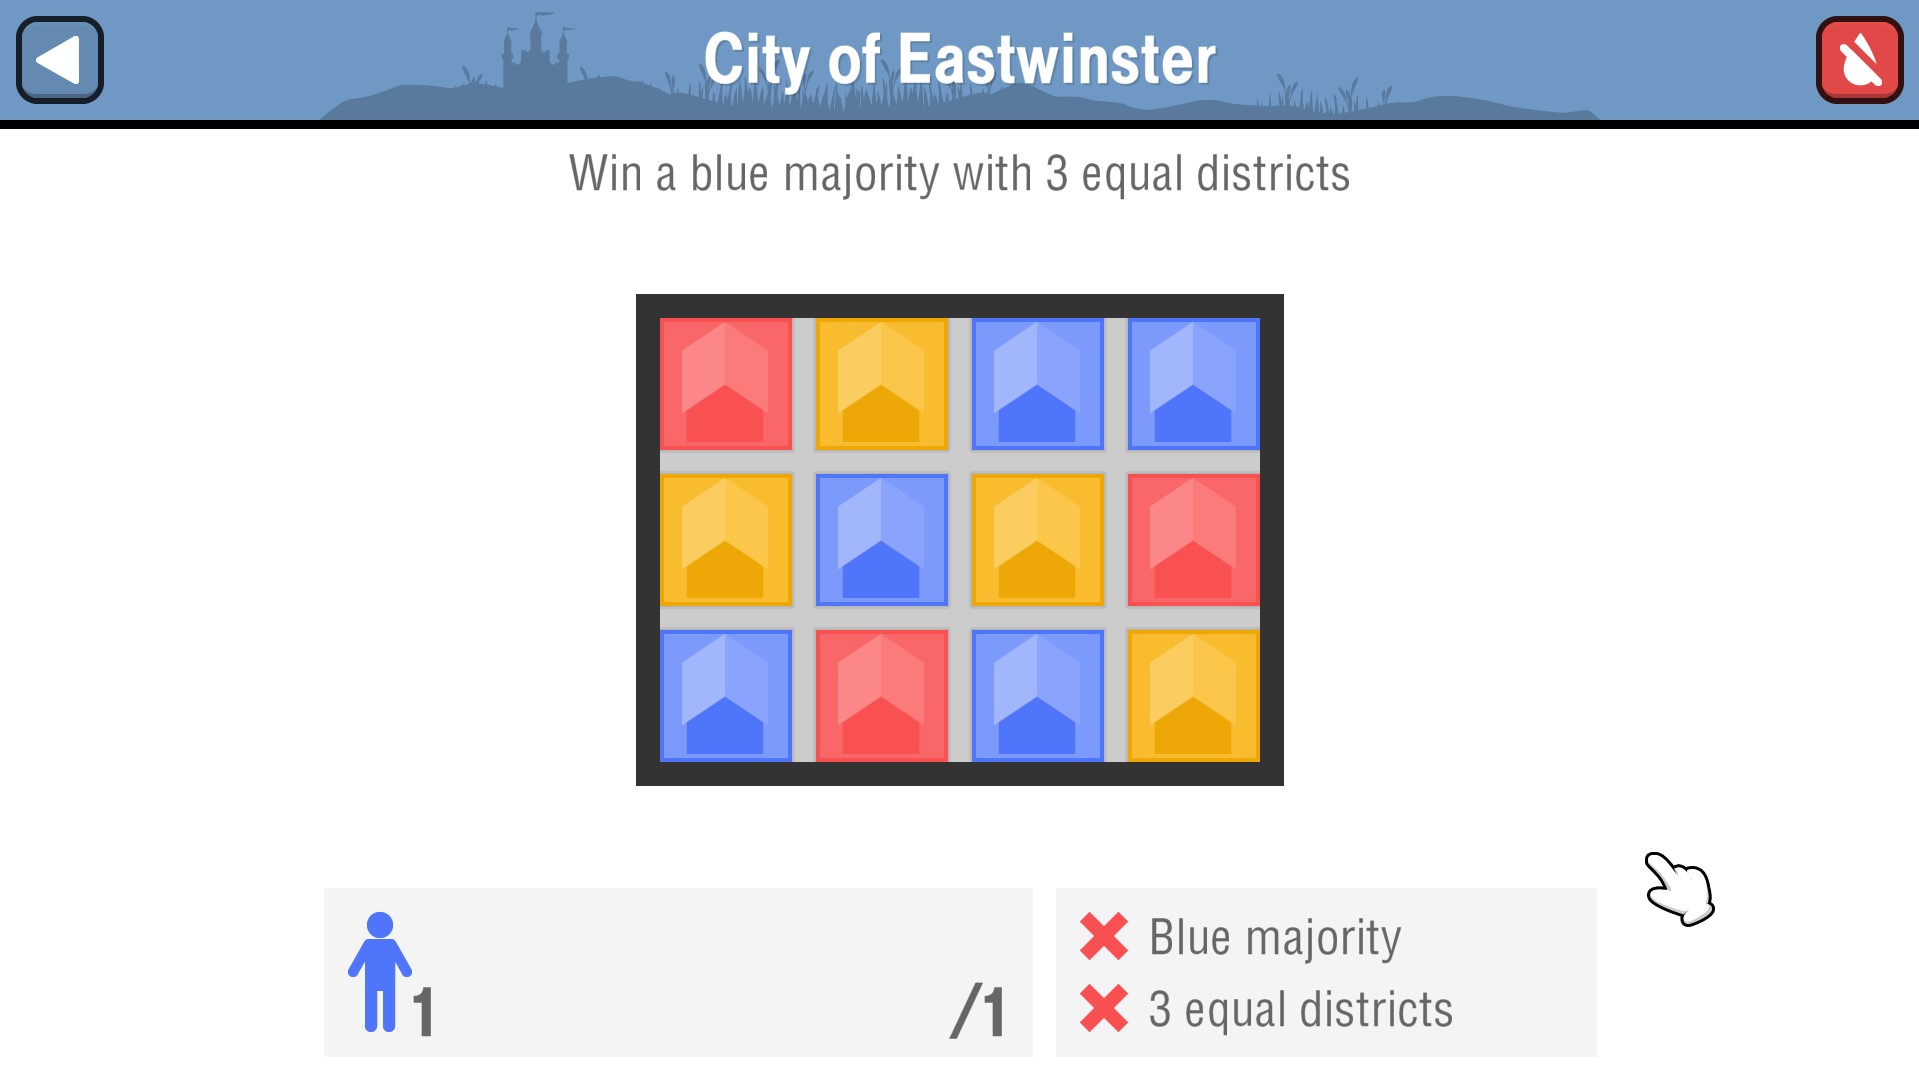 City of Eastwinster